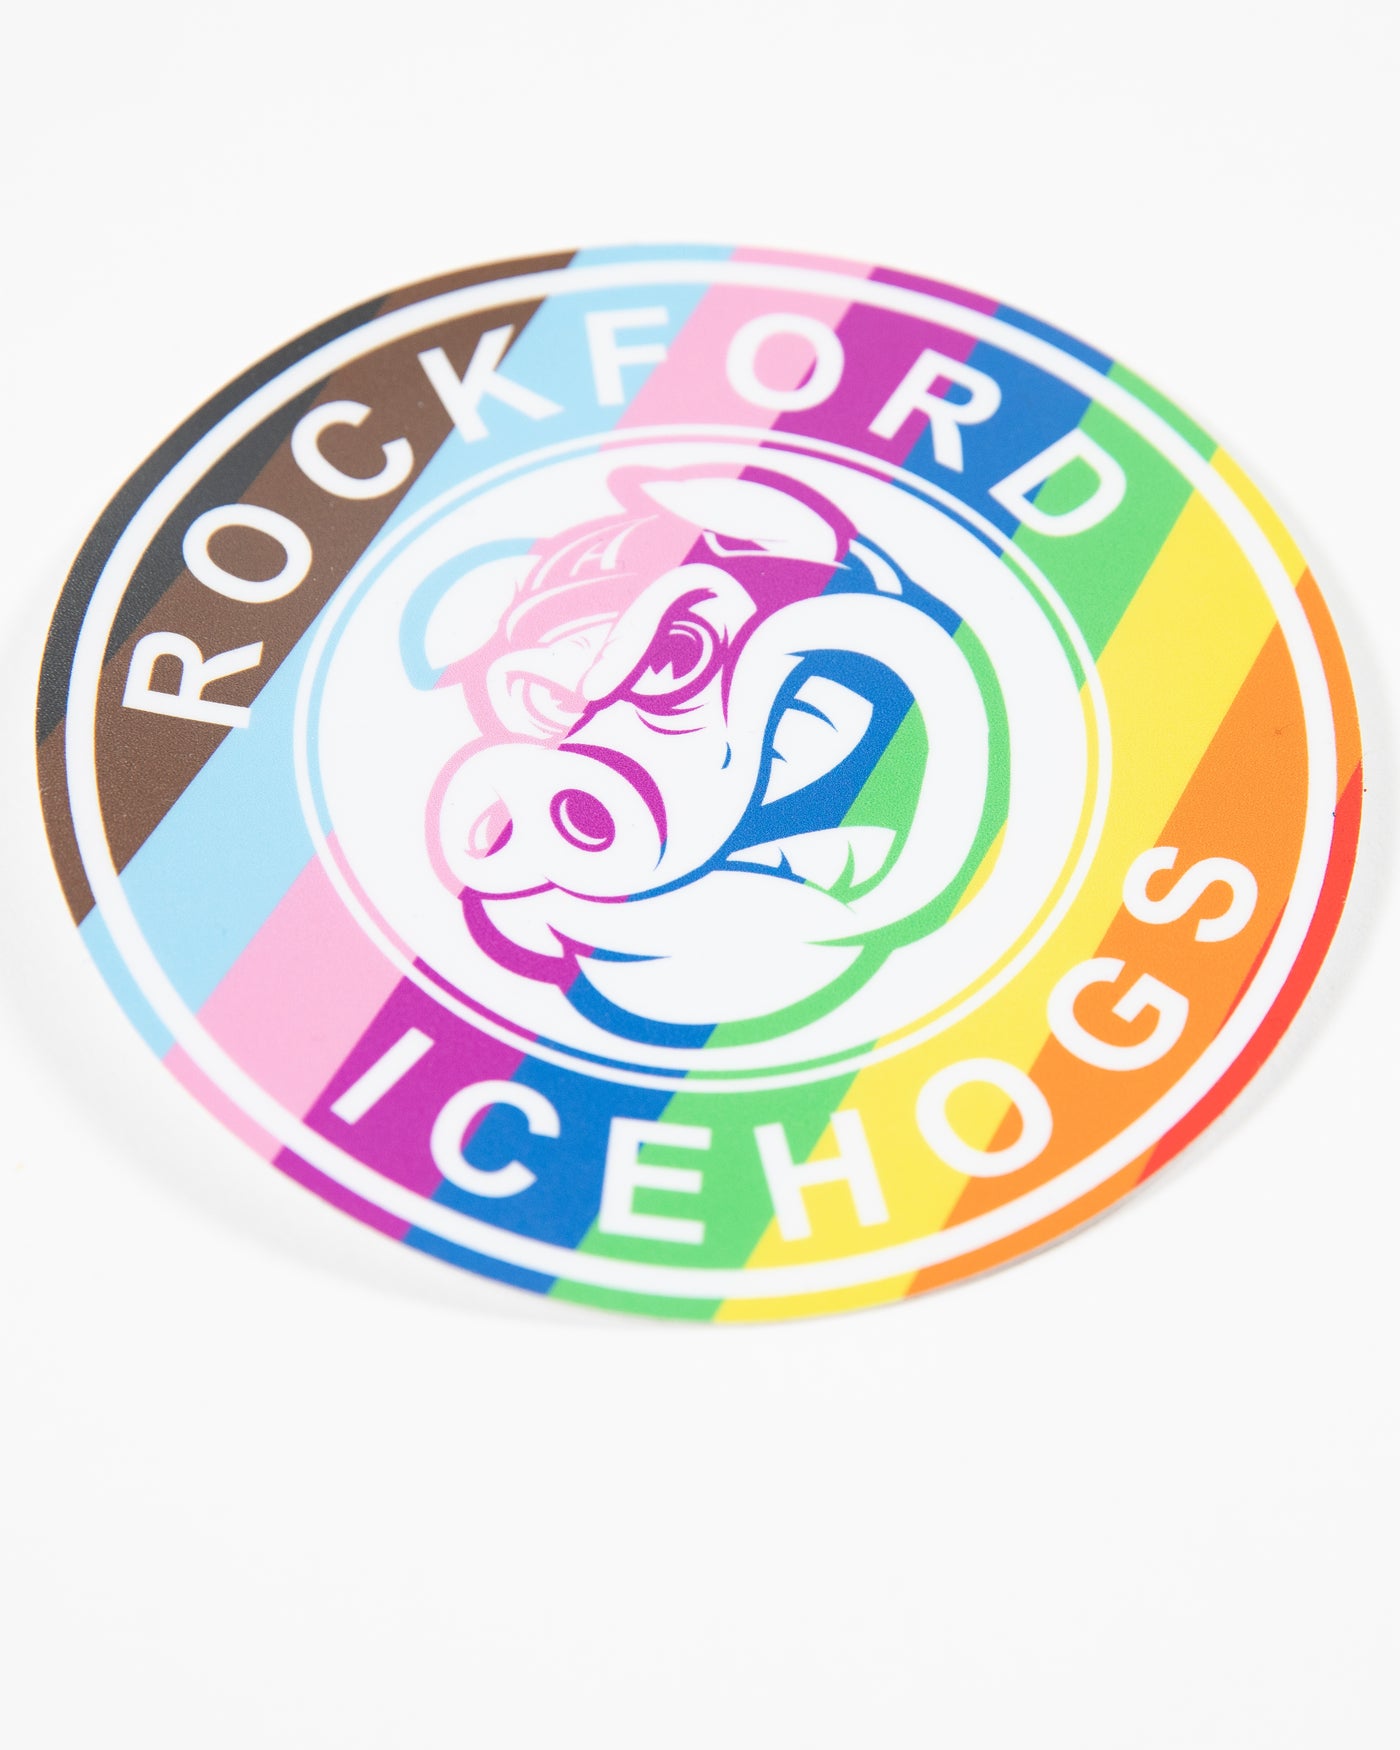 Rockford IceHogs decal with Hammy logo in Pride colorway - angled lay flat